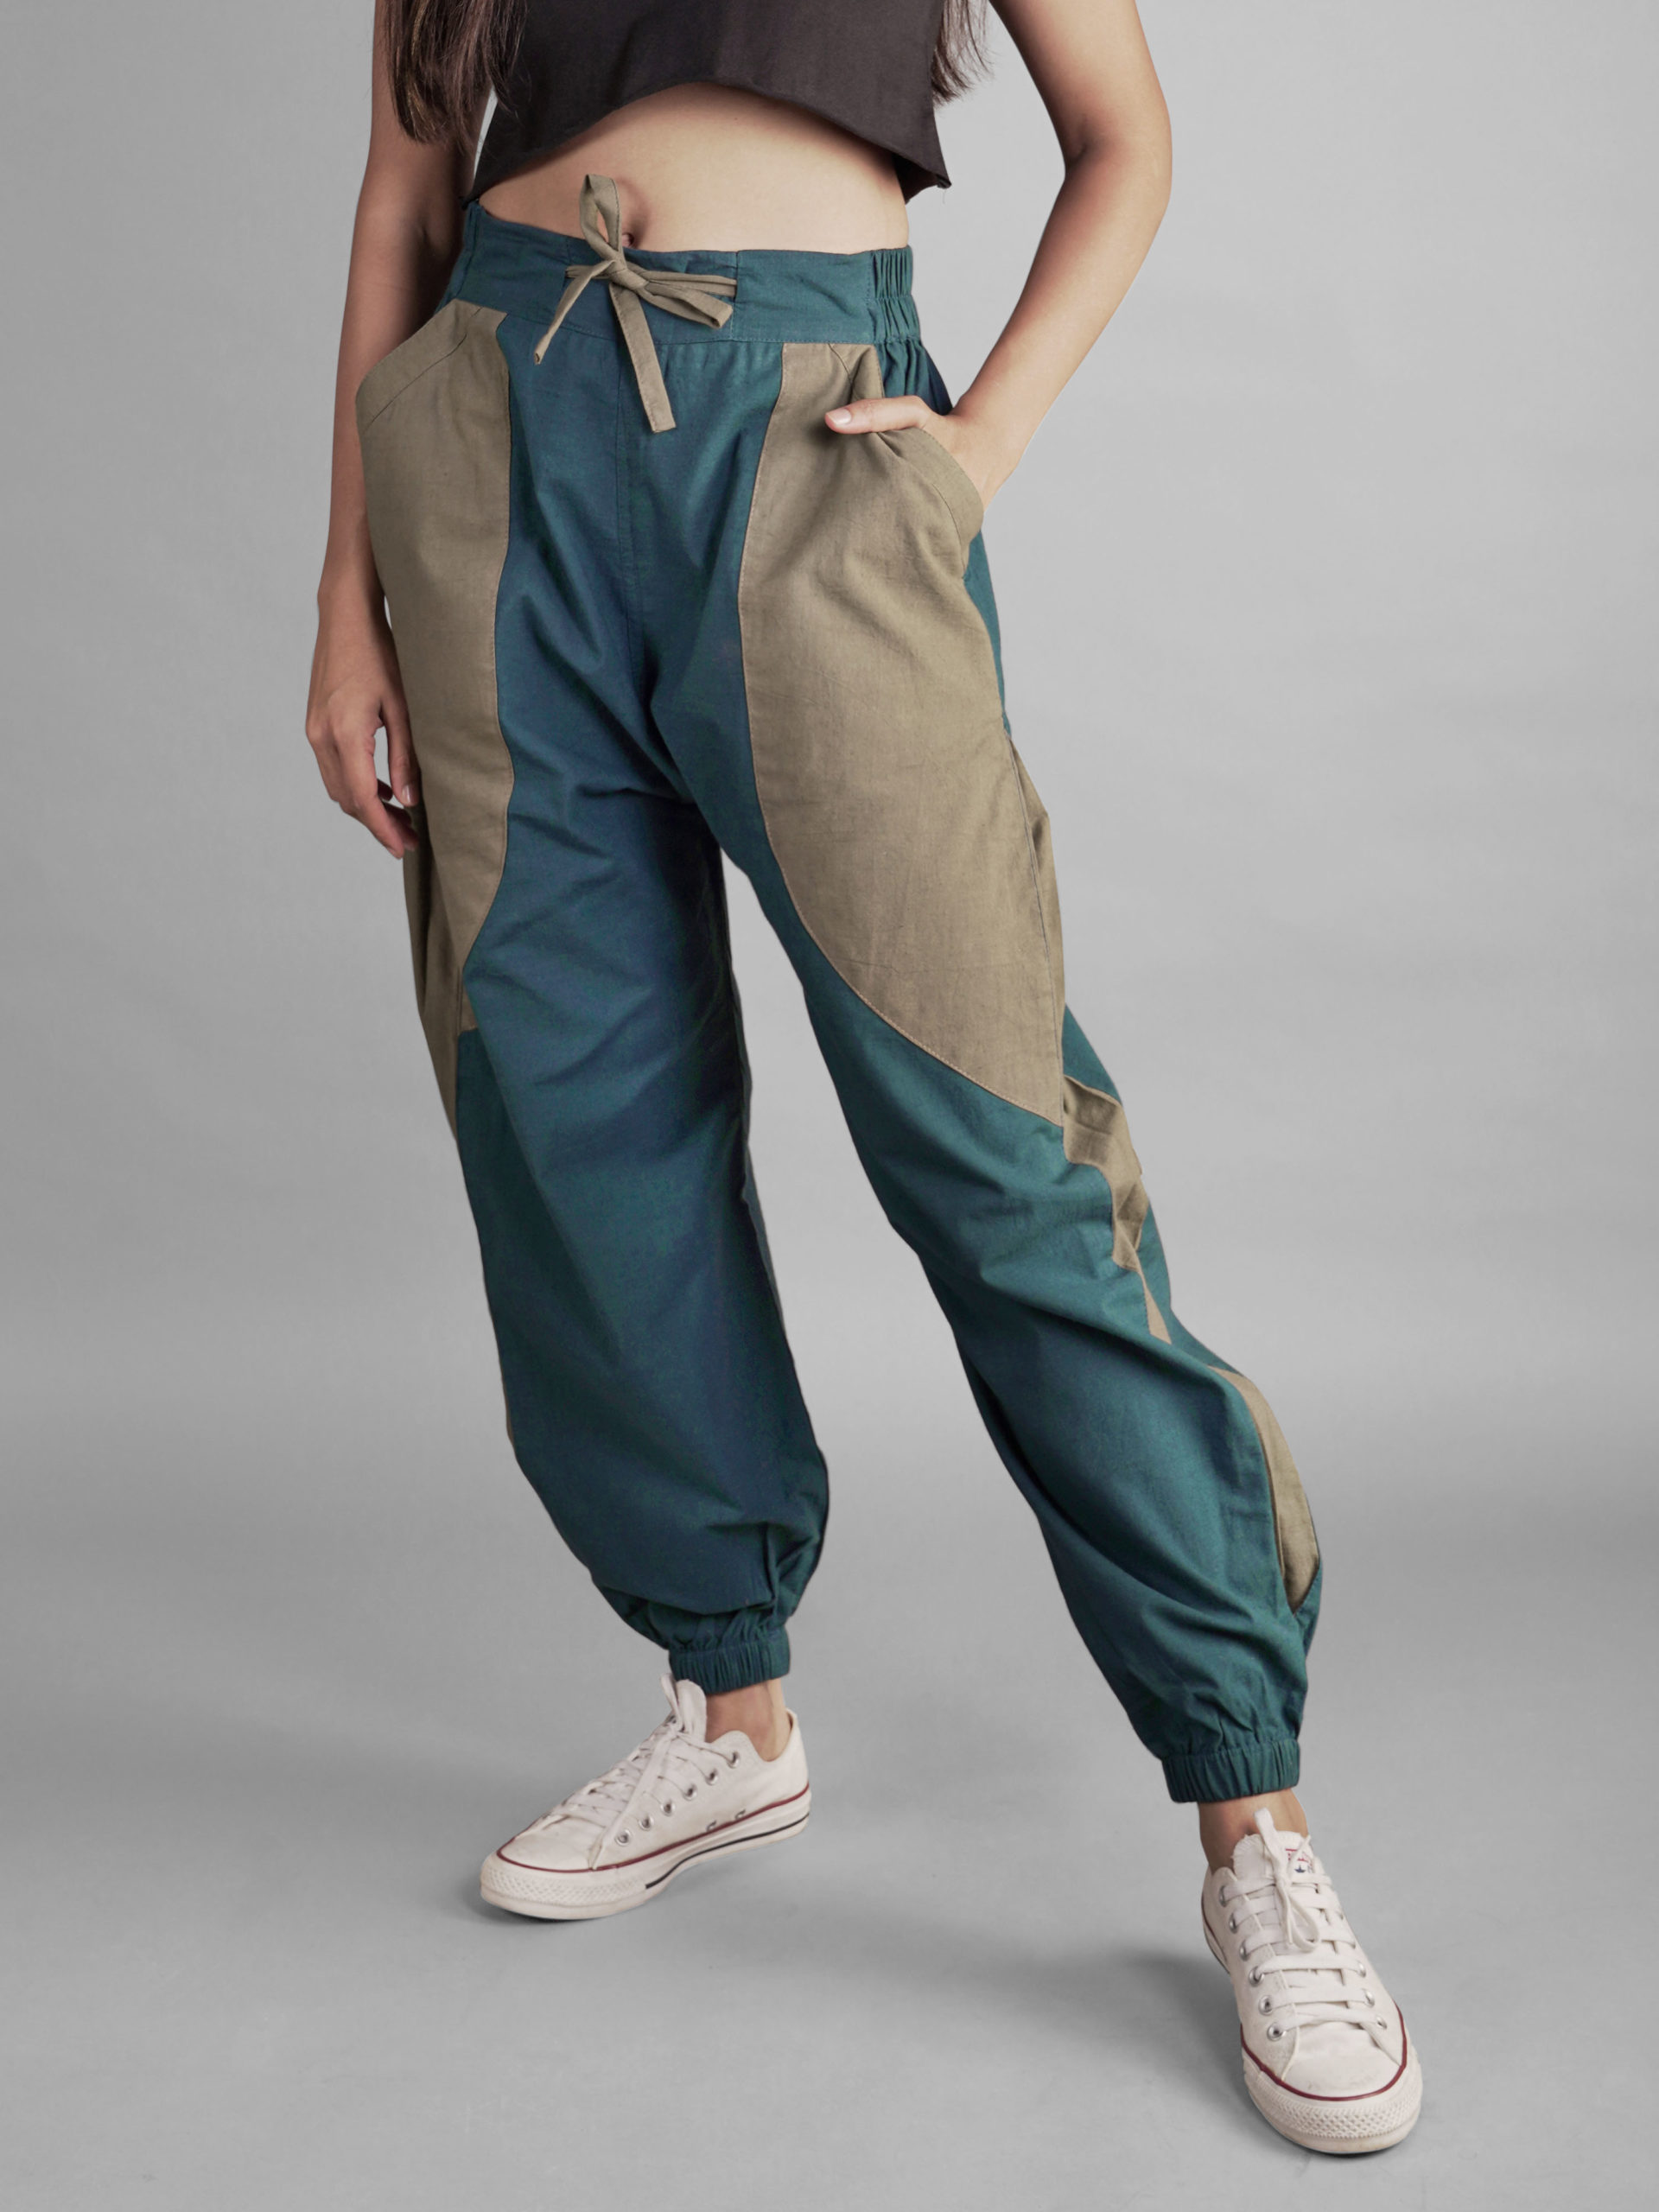 Turquoise & Beige Textured Hoppers – Unisex Pants For Men And Women ...